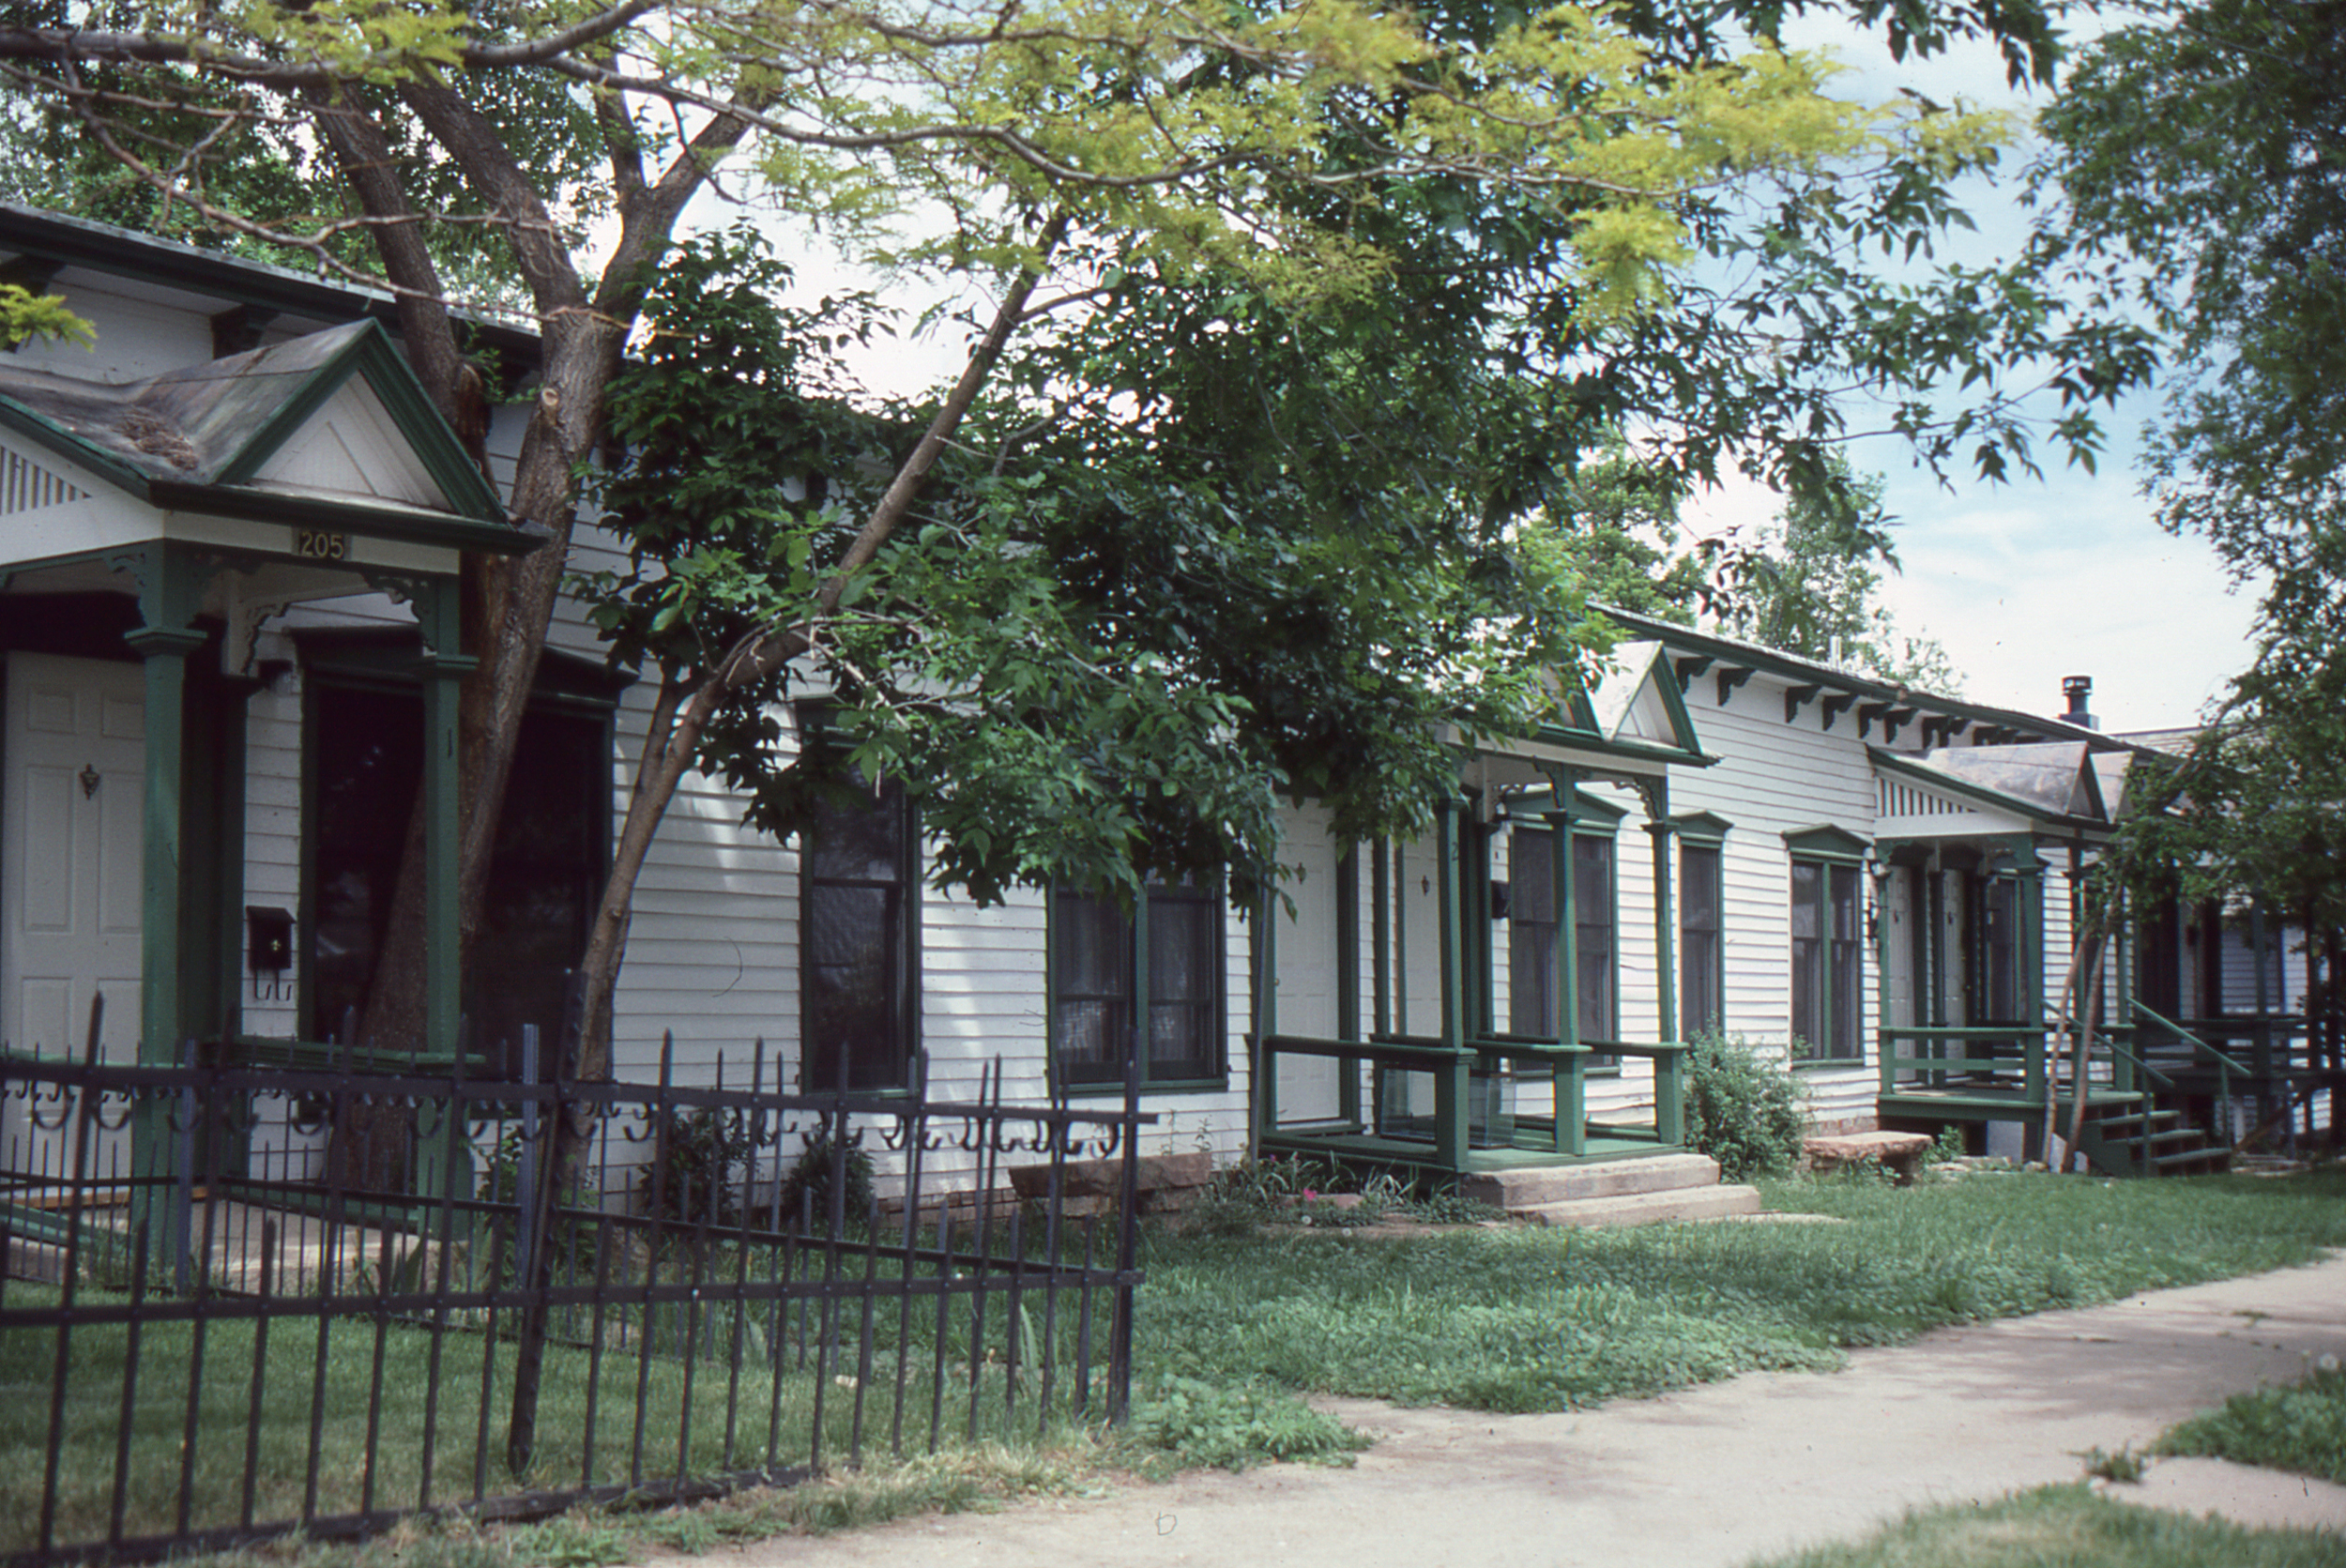 The Terrace in the 1980s.